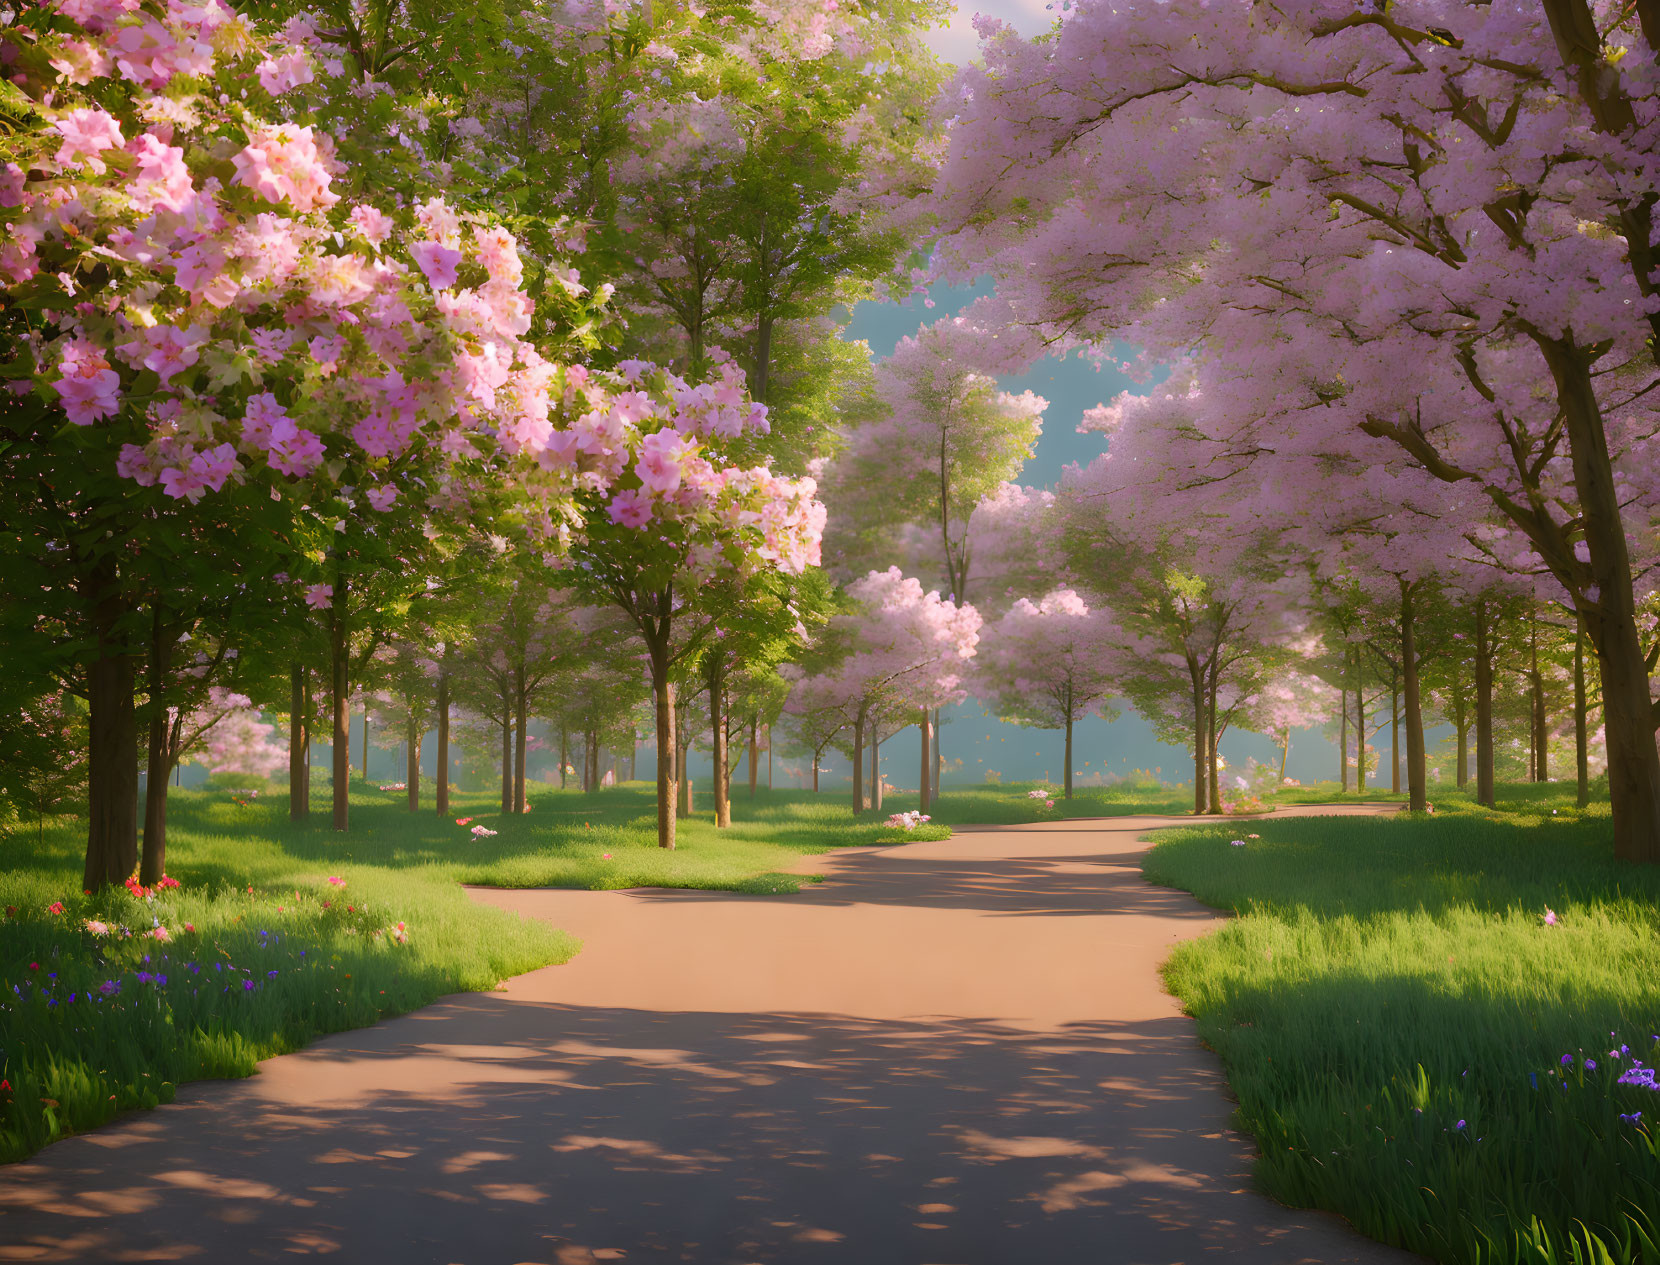 Tranquil park path with blooming cherry blossom trees and wildflowers